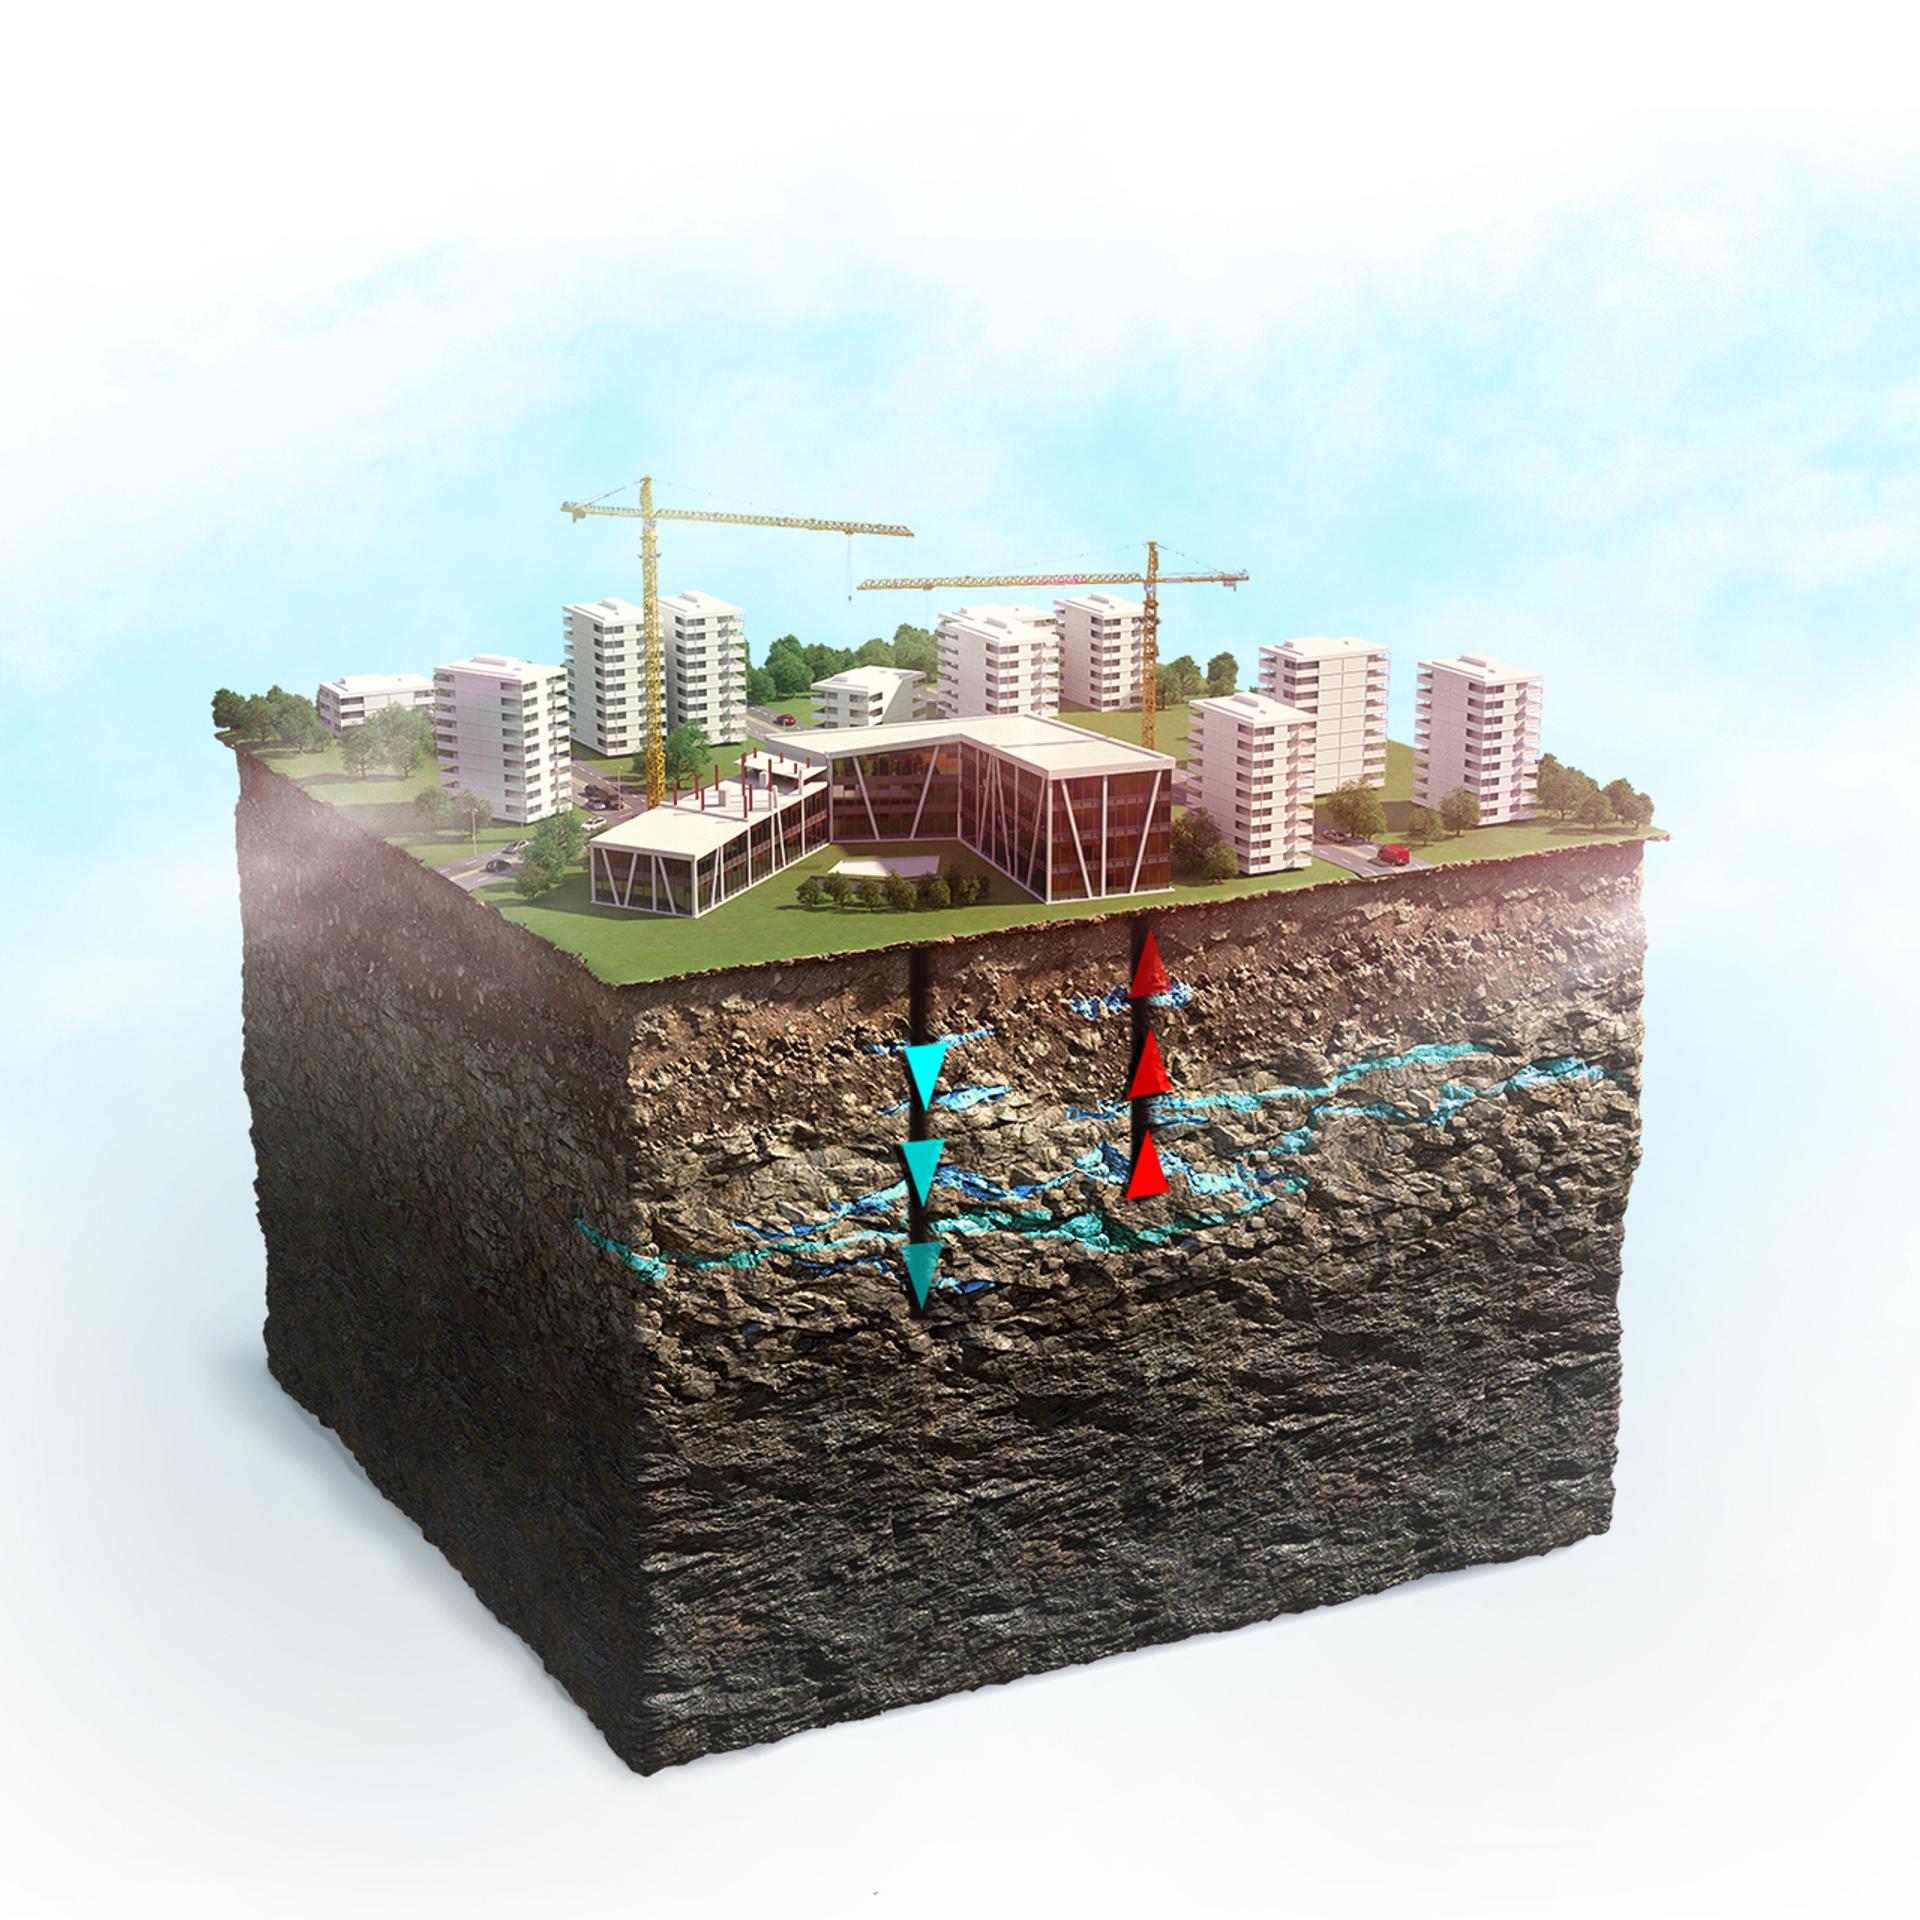 Illustration of underground heating and cooling system for buildings